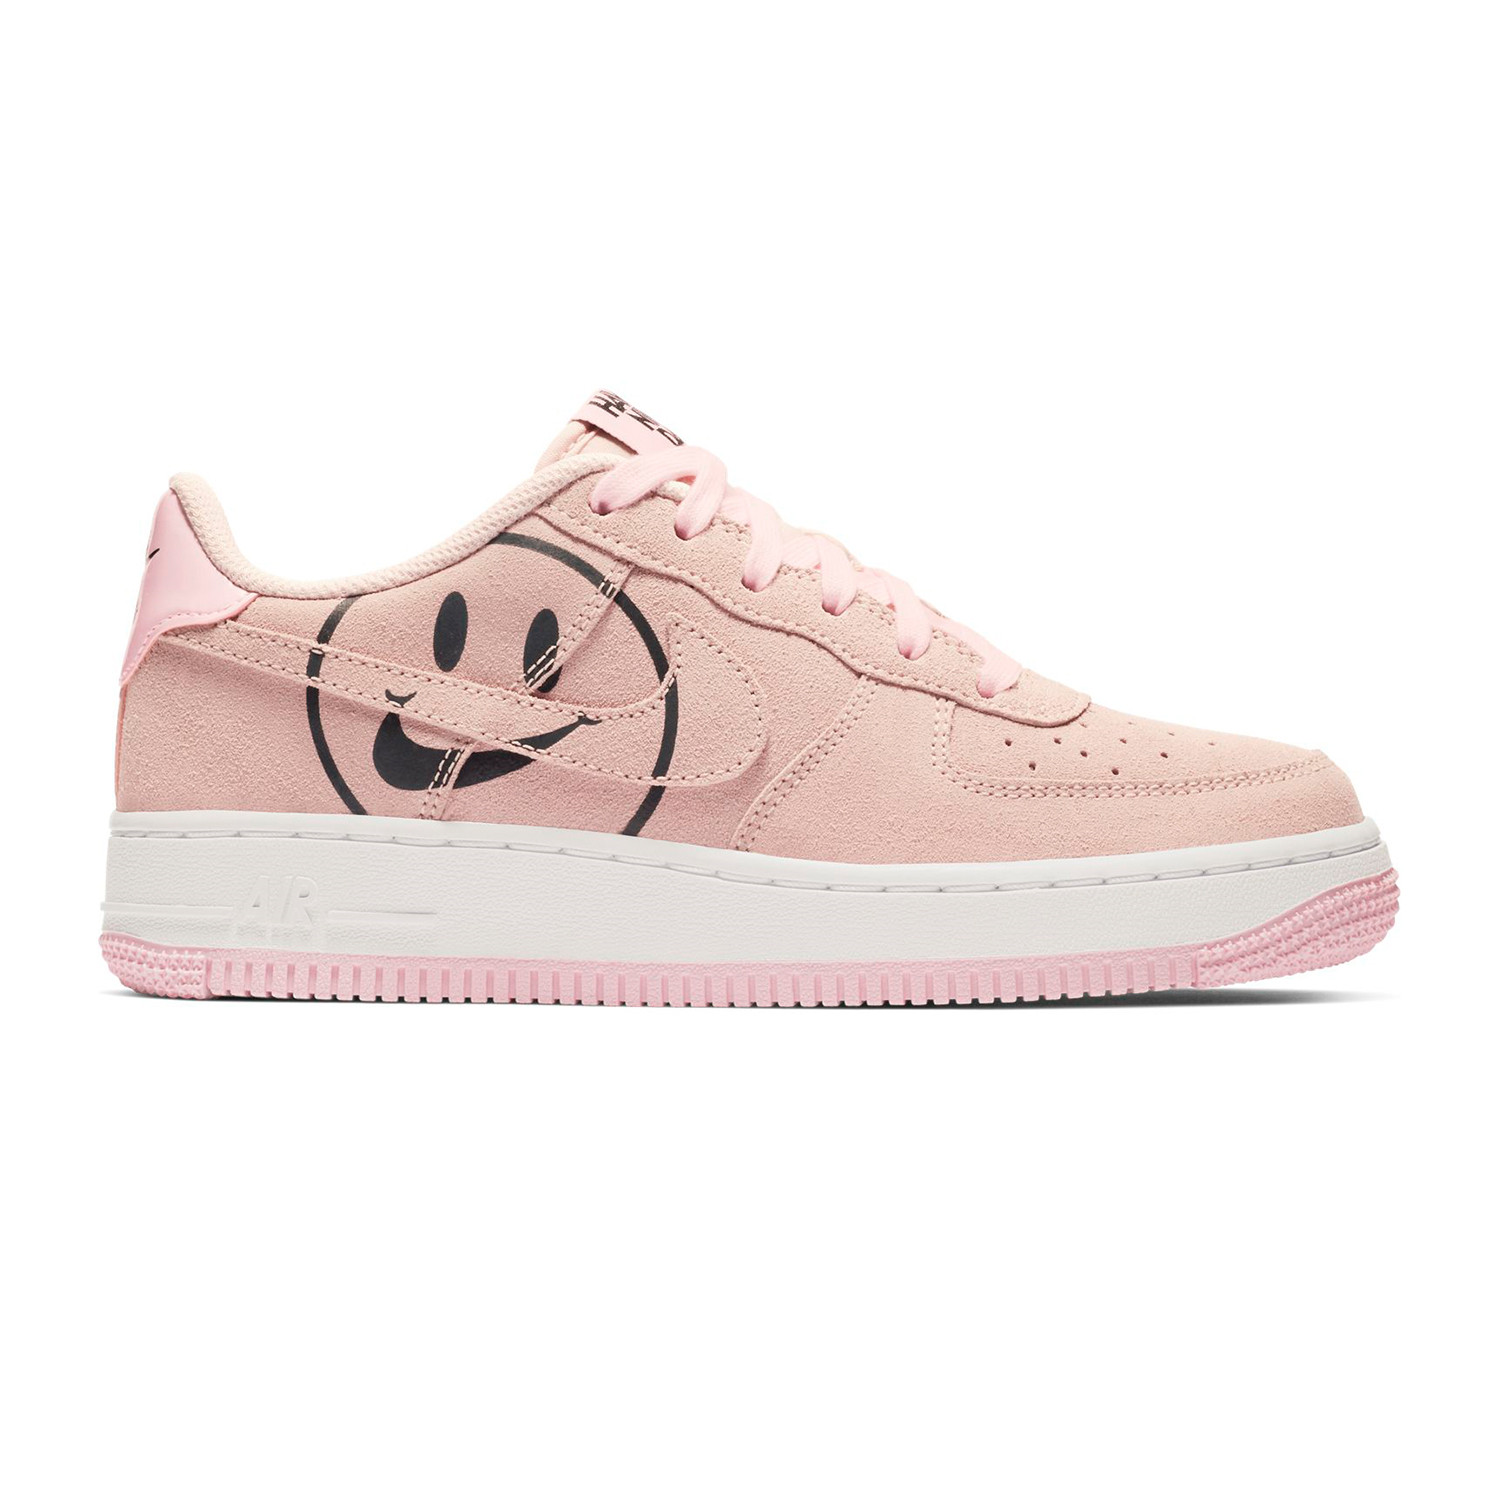 Nike Air Force 1 ‘Have A Nice Day’ LV8 2 GS ( AV0742-600 )